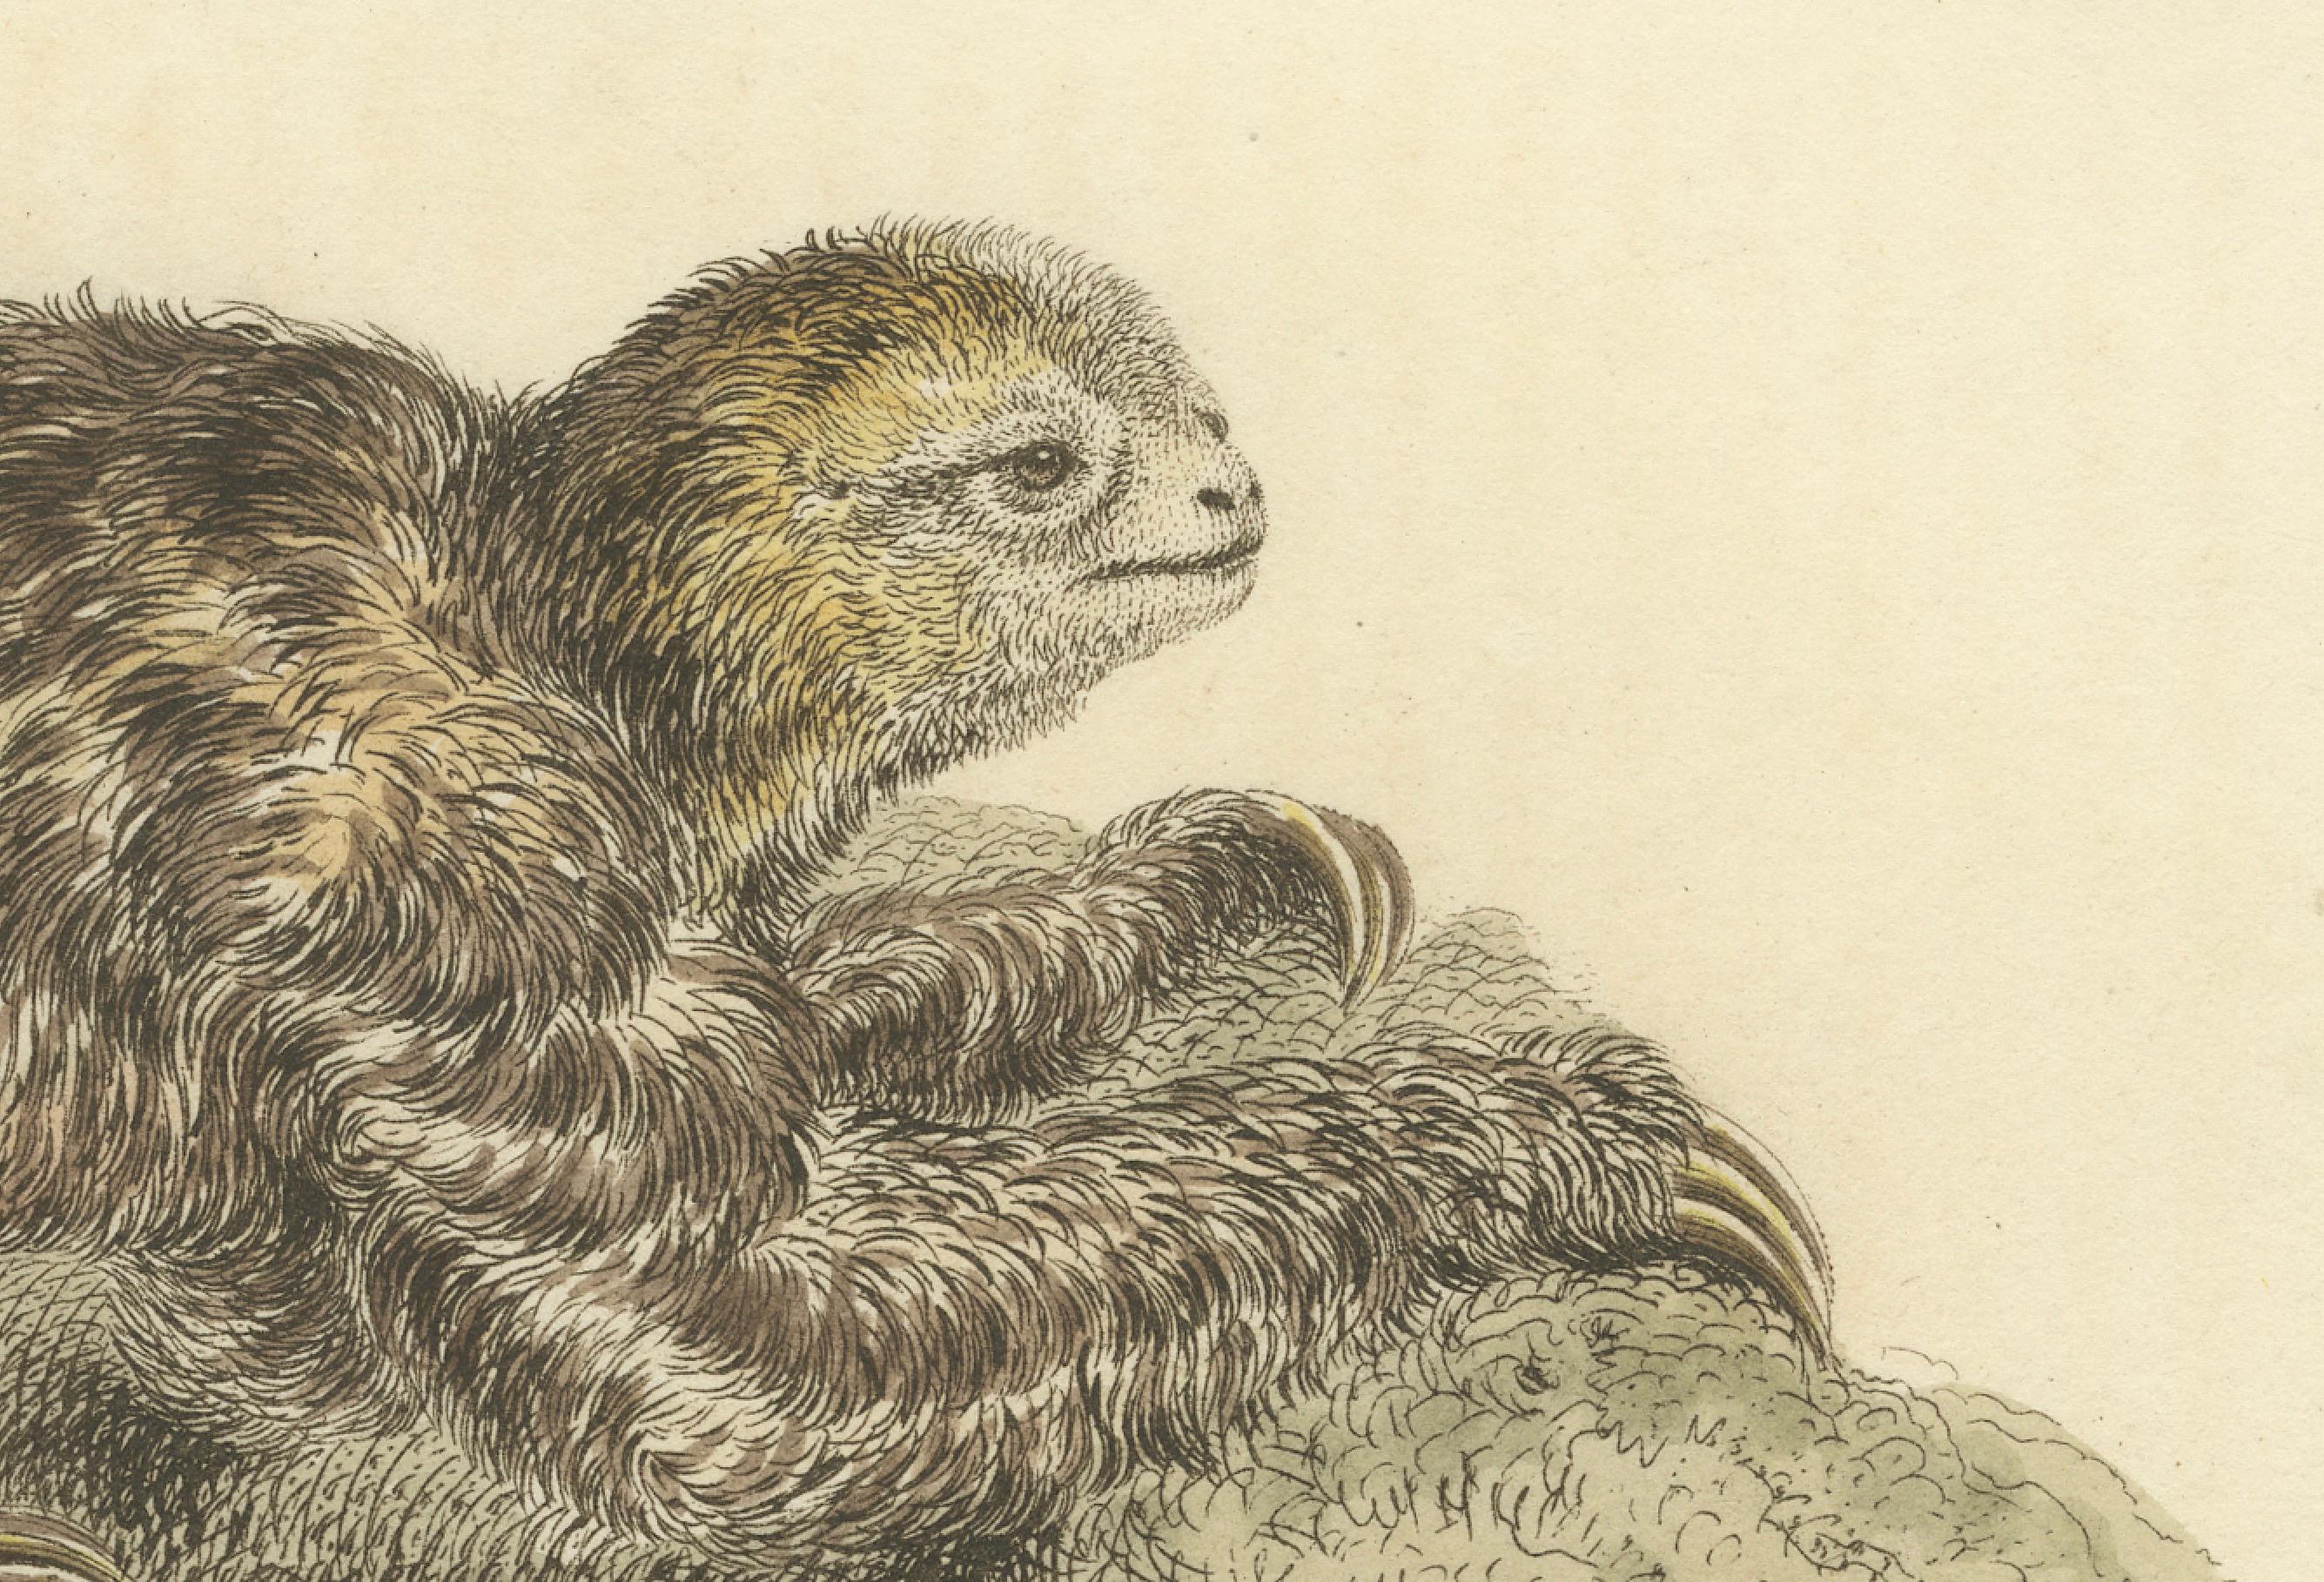 The image is a fine example of a 19th-century natural history illustration, specifically an antique print titled 'The three-toed sloth'. Published by G.B. Whittaker from an illustration by Charles Hamilton Smith around 1825, it was part of their